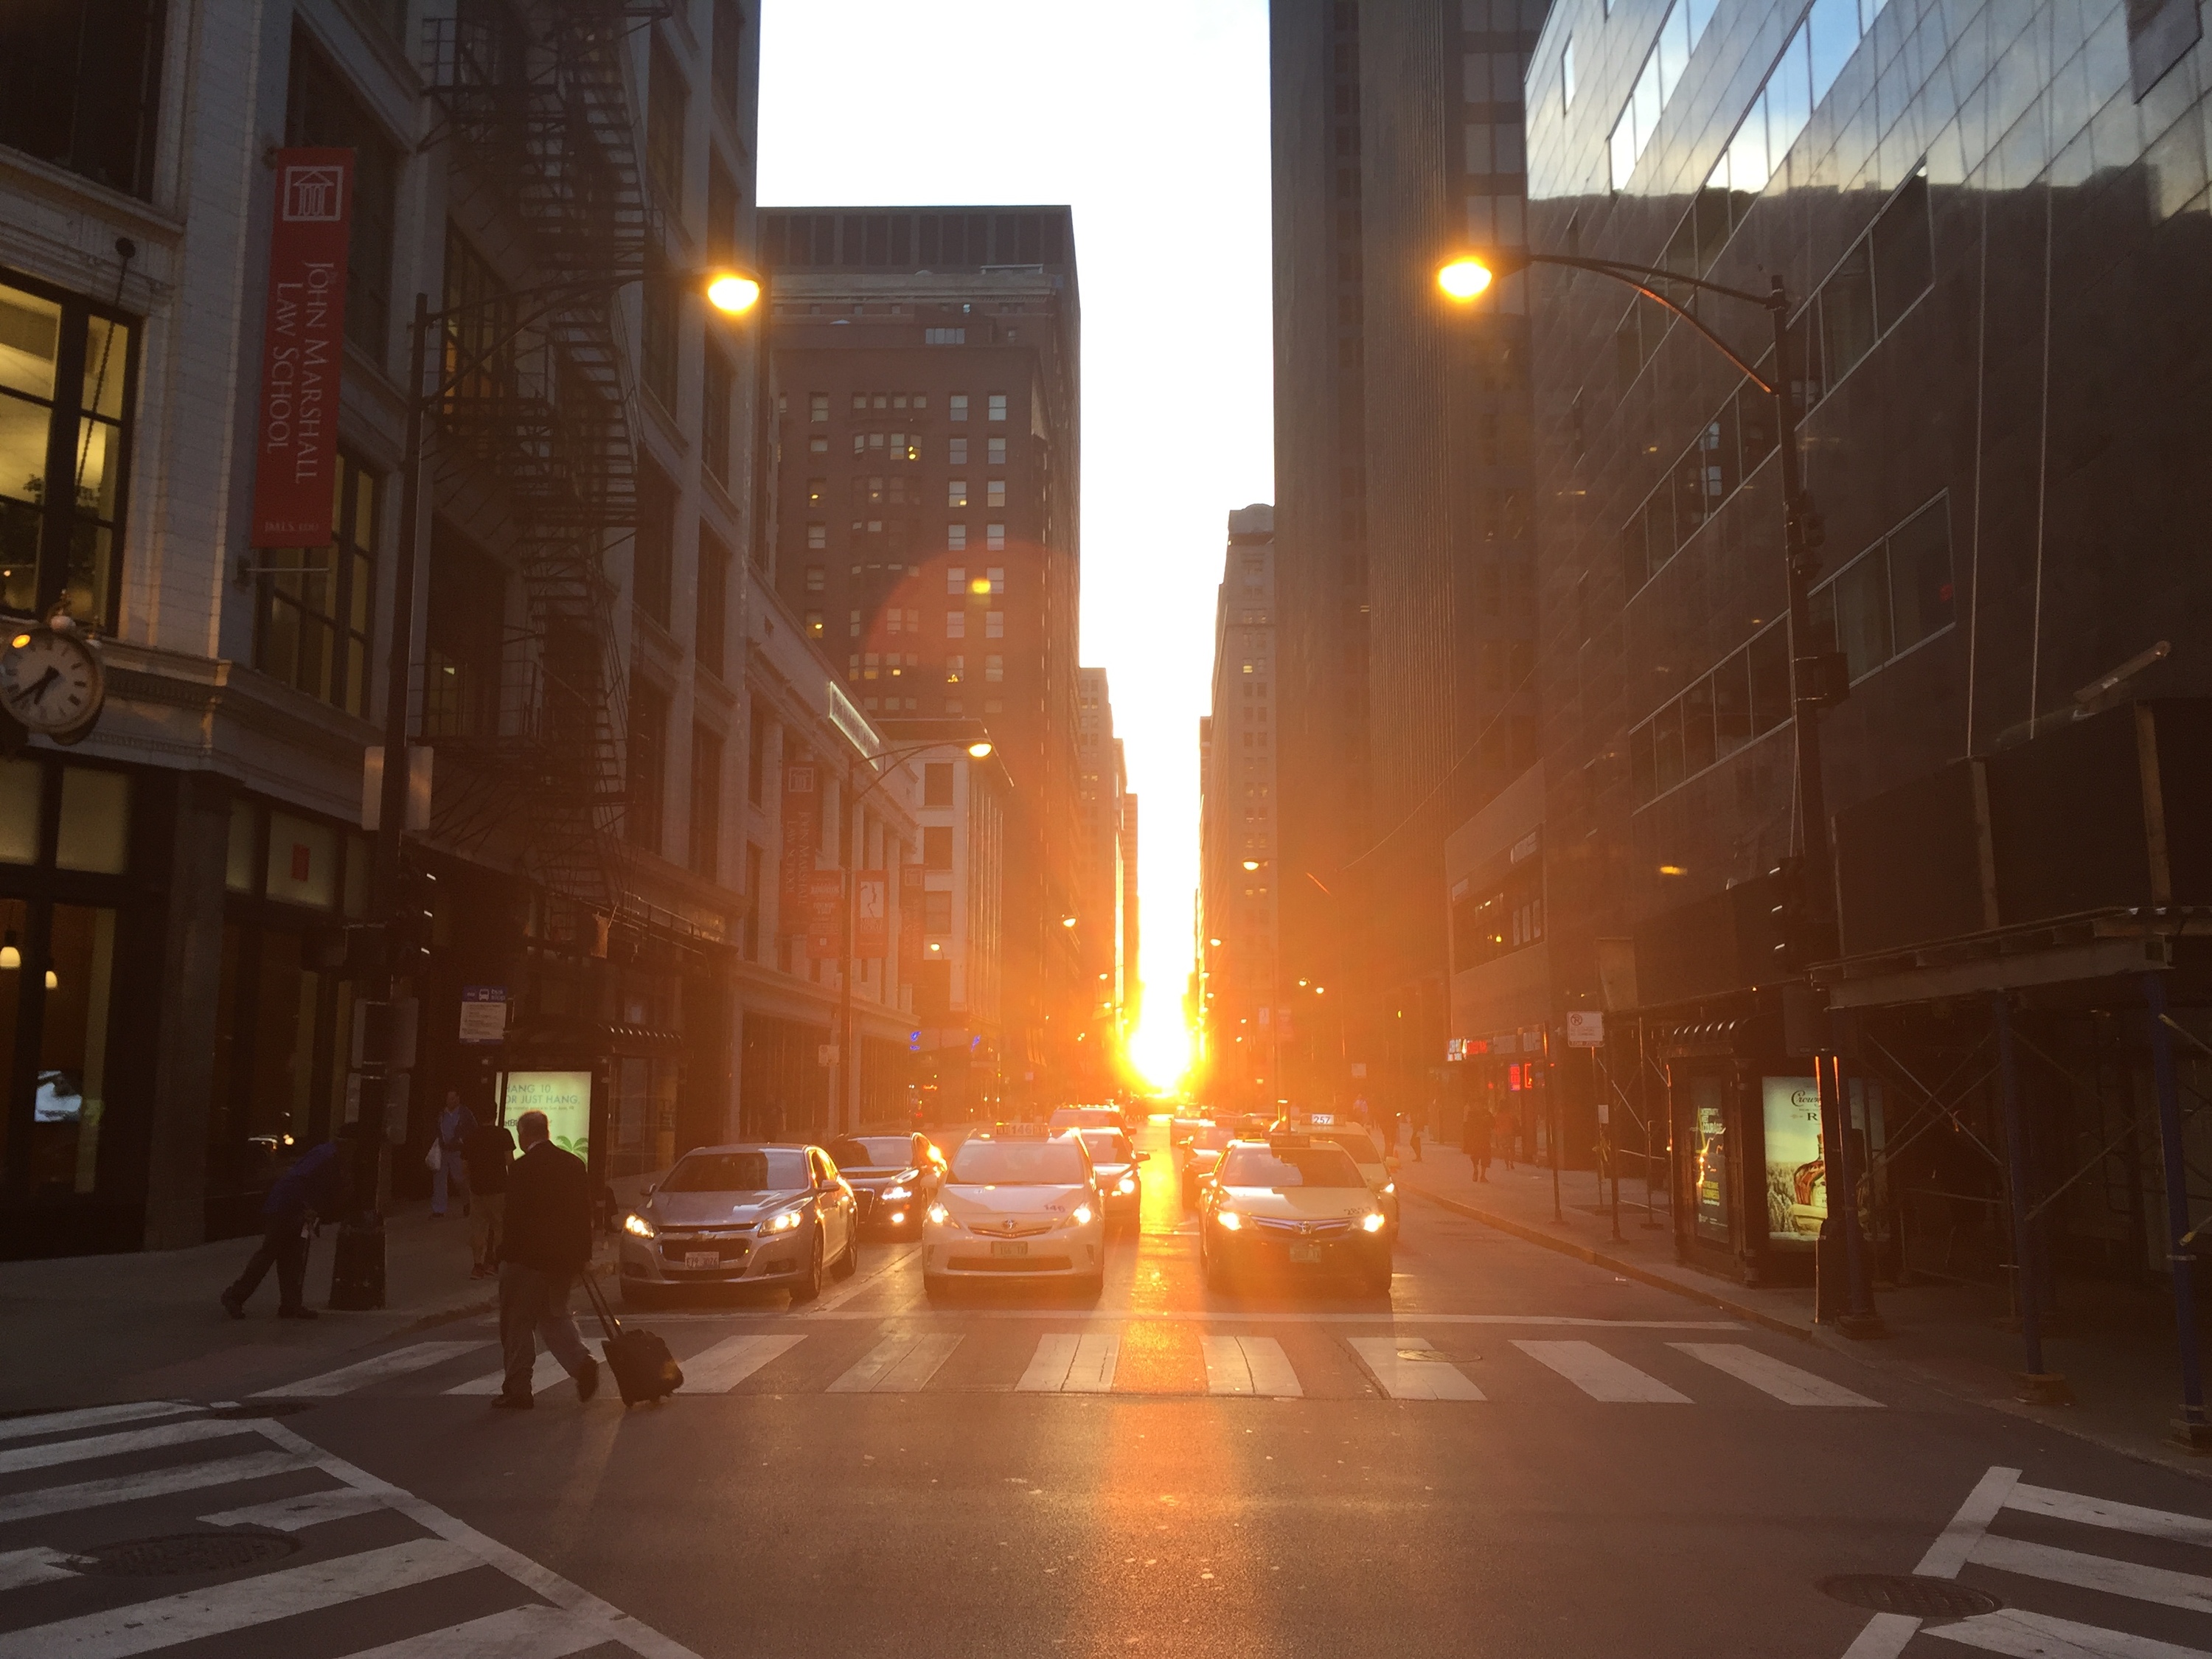 Snap a photo of Chicagohenge throughout the city this evening